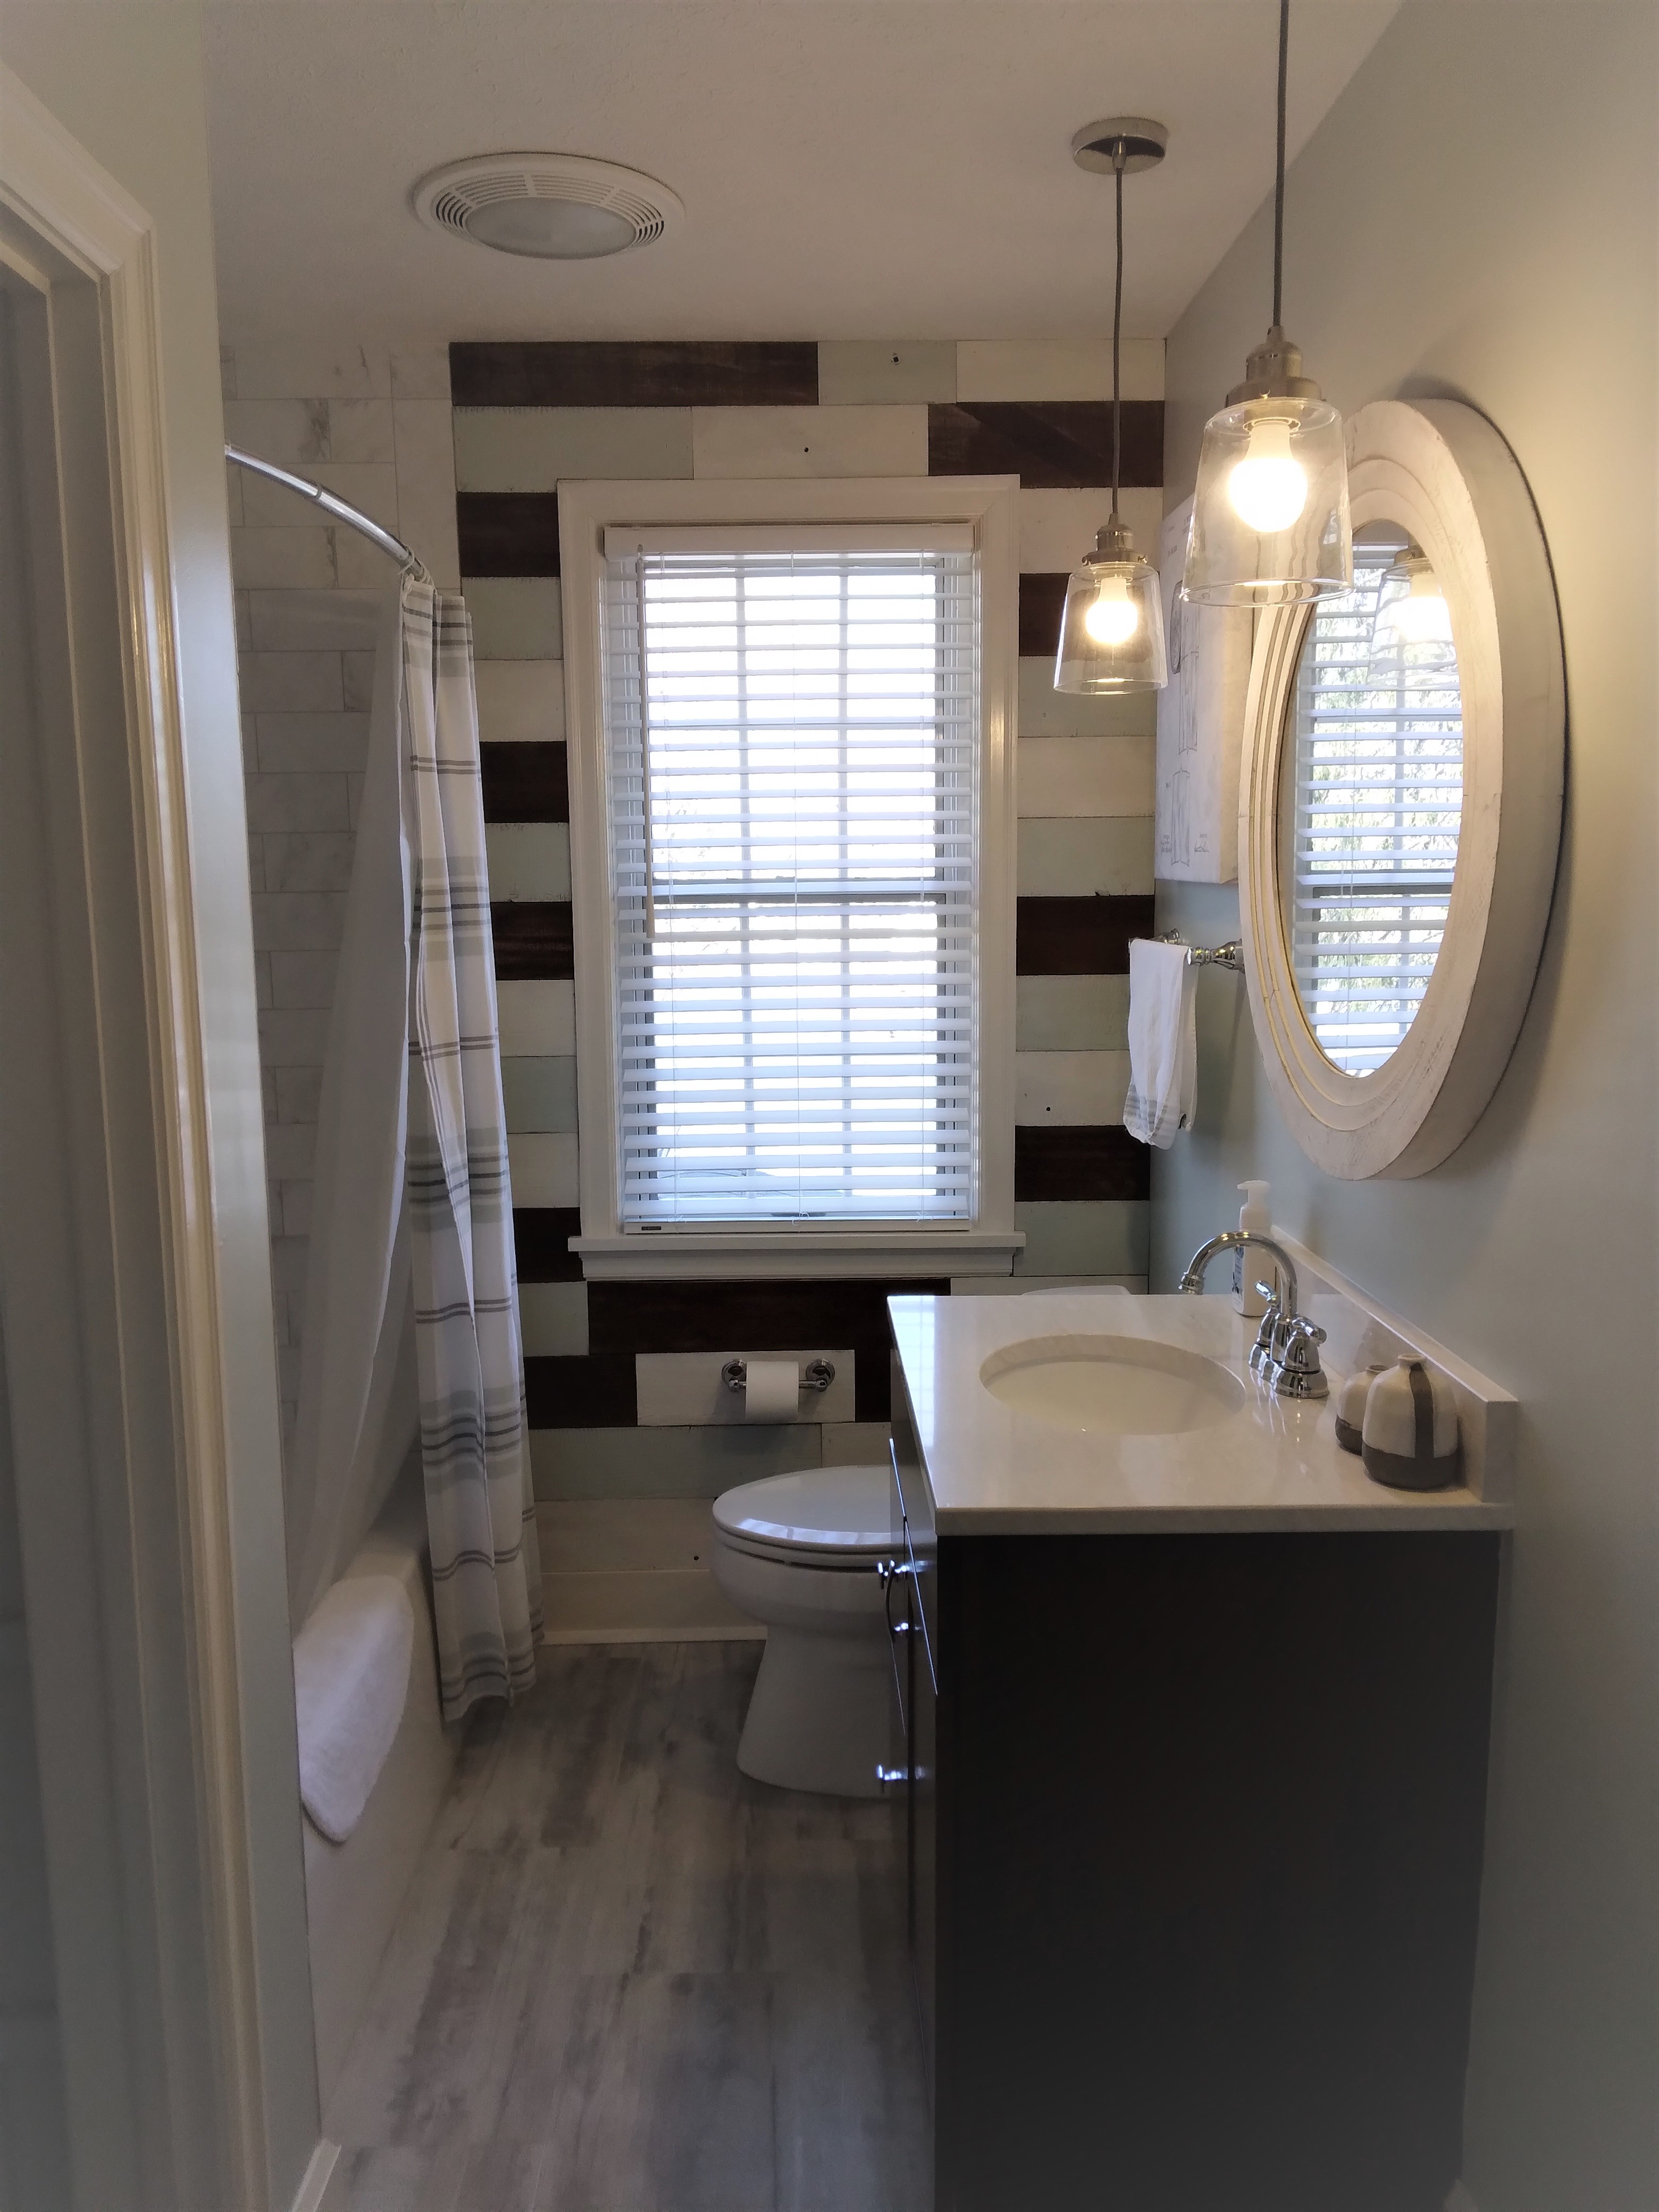 These white faux wood blinds are perfect for this Springfield Illinois bathroom window.  BudgetBlinds  WindowCoverings  Blinds  SpringfieldIllinois  Springfield